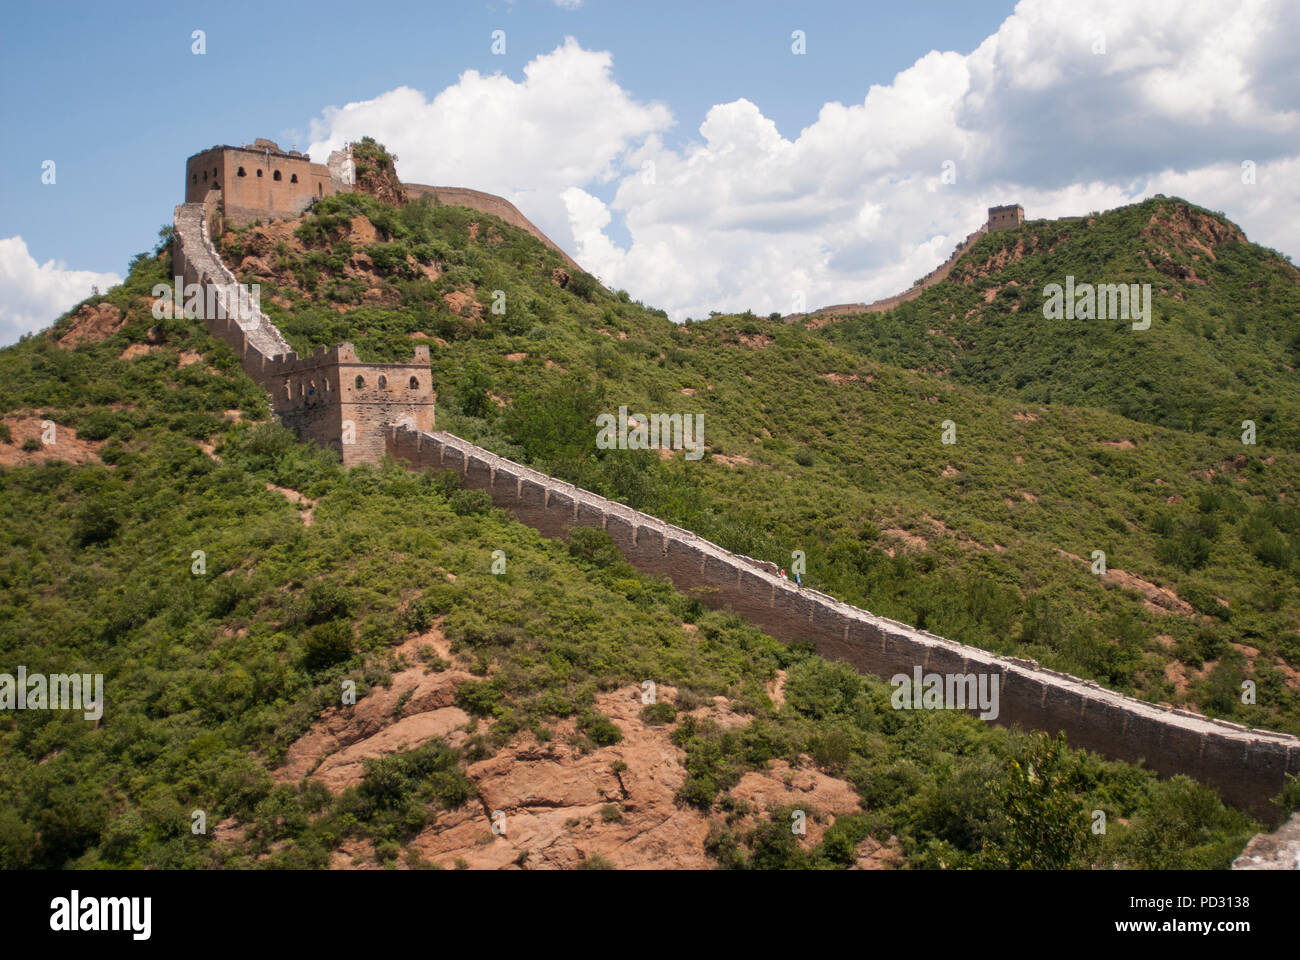 The Great Wall of China at Jinshanling, a popular hiking route and one of the best preserved parts of the Great Wall with many original features. Stock Photo